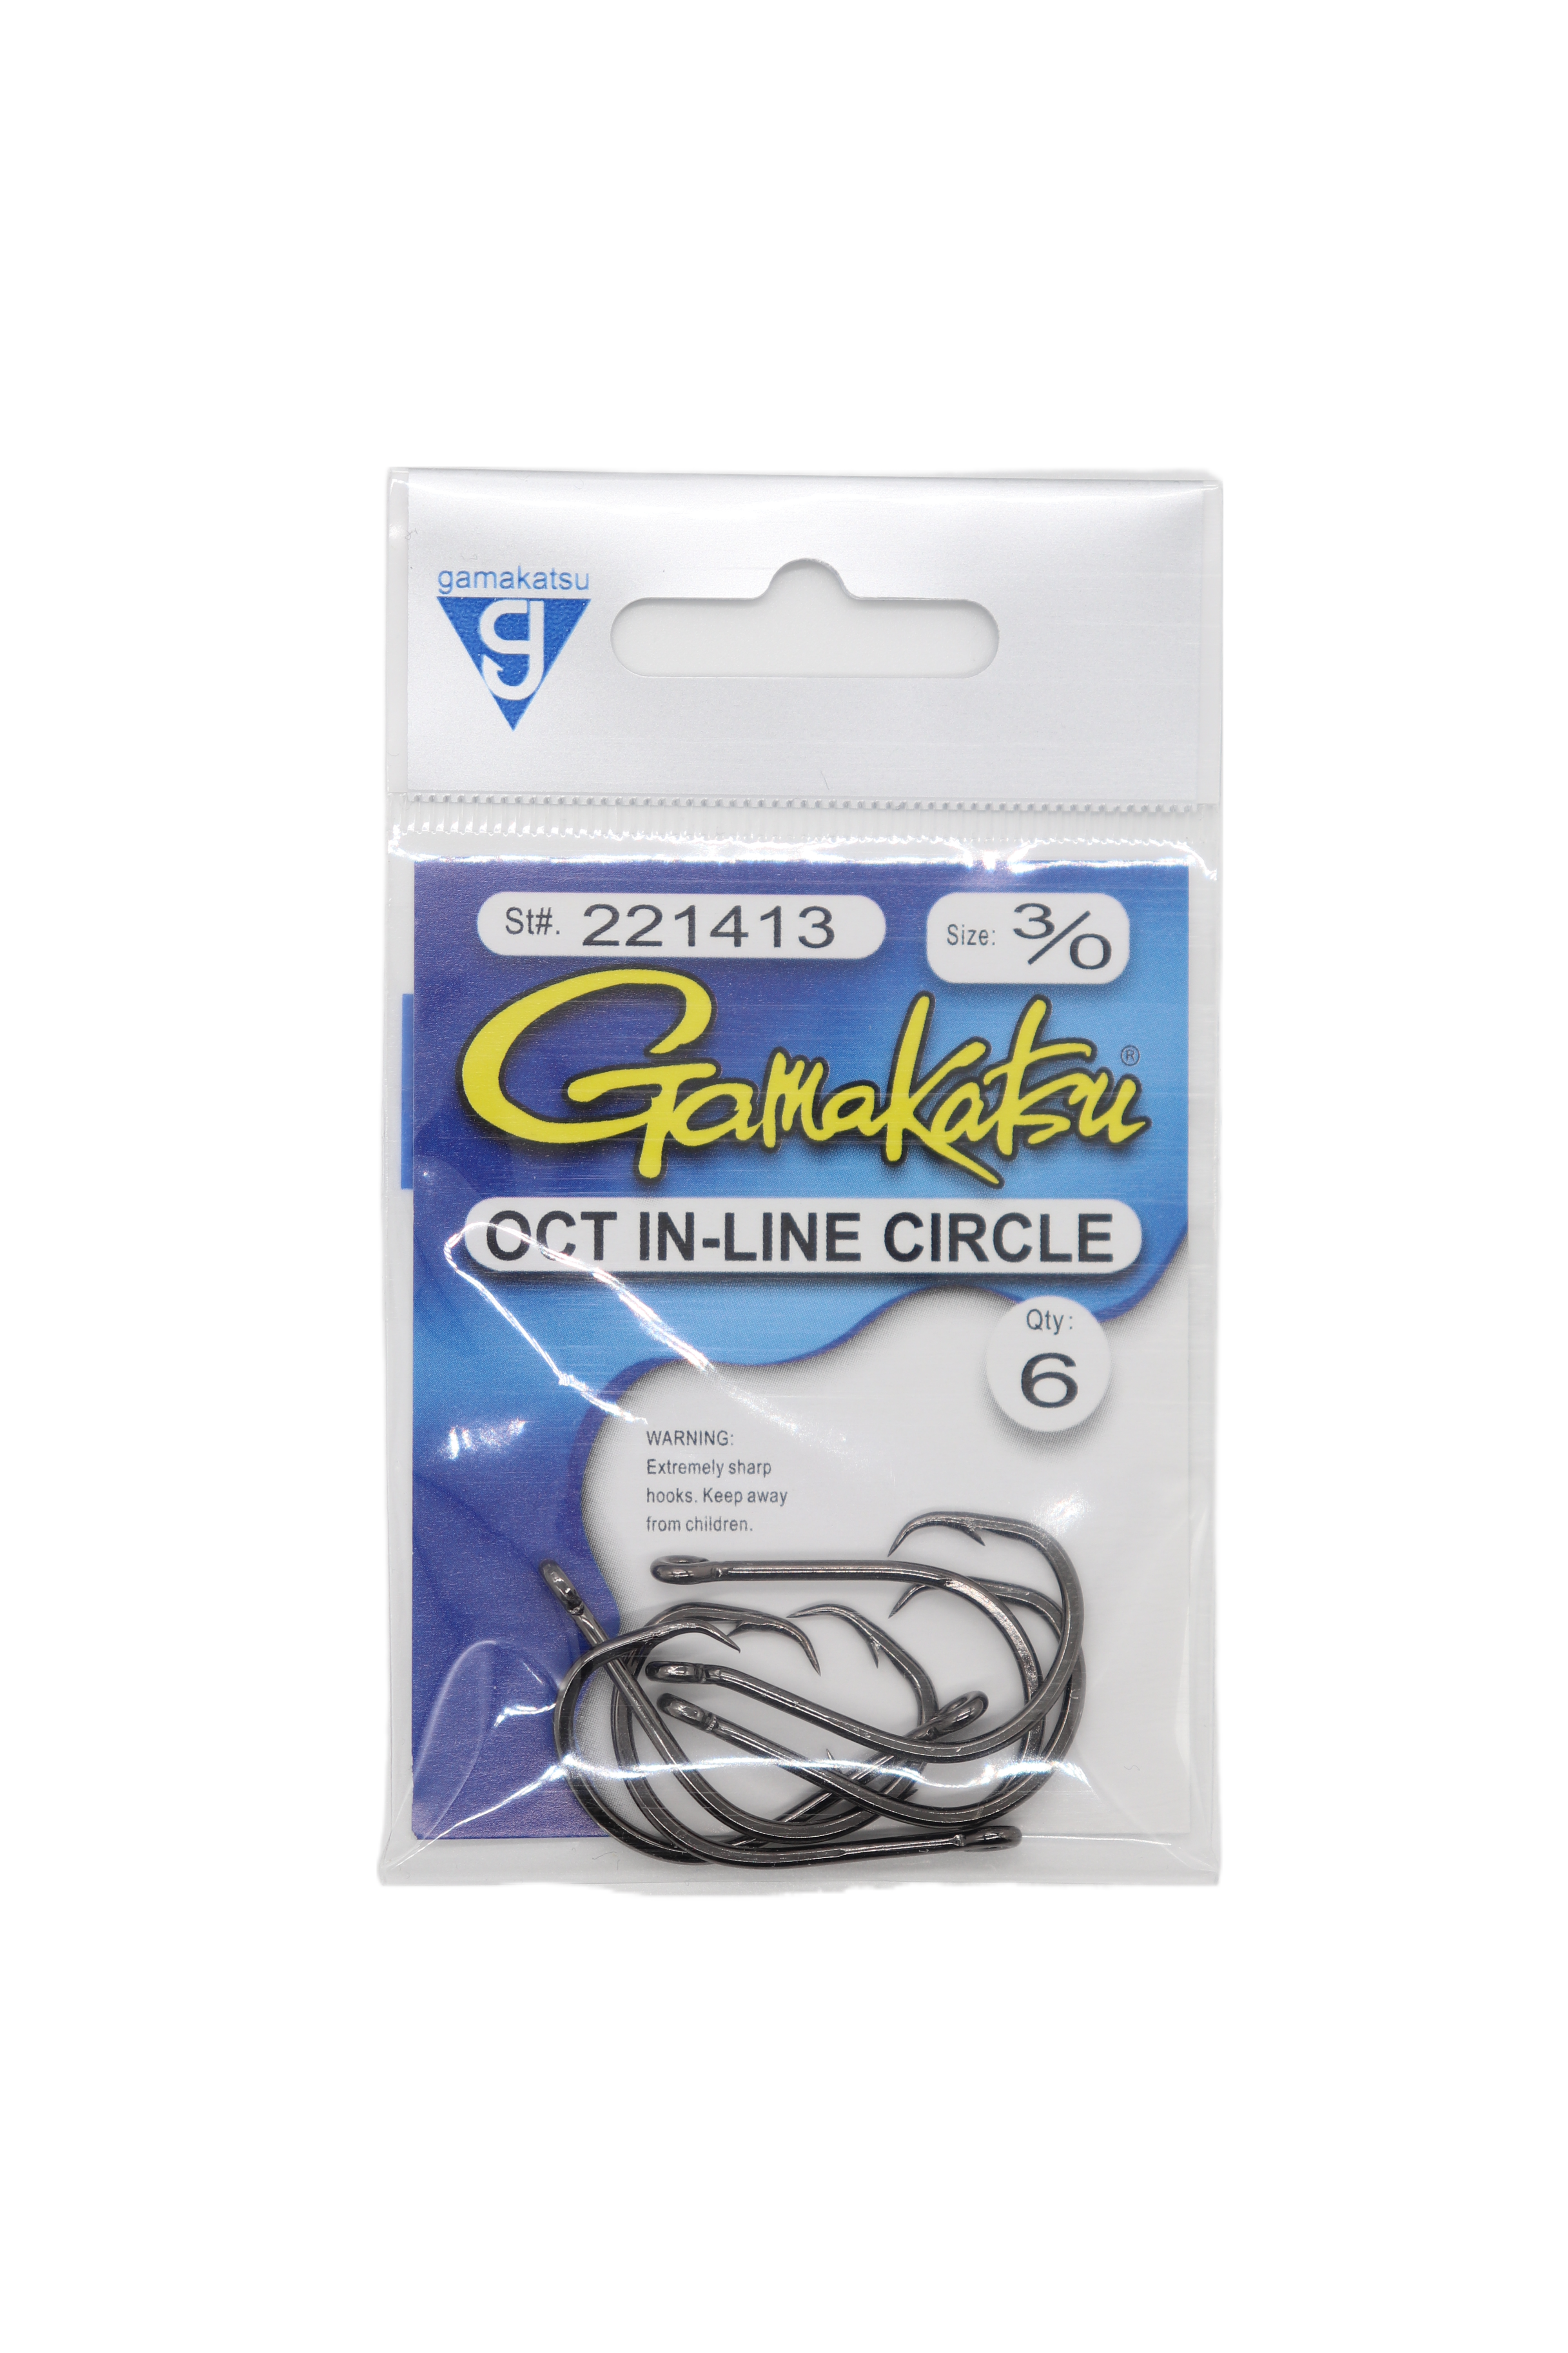 Gamakatsu OCT IN-LINE CIRCLE Hooks - Fishing Tackle and Supplies